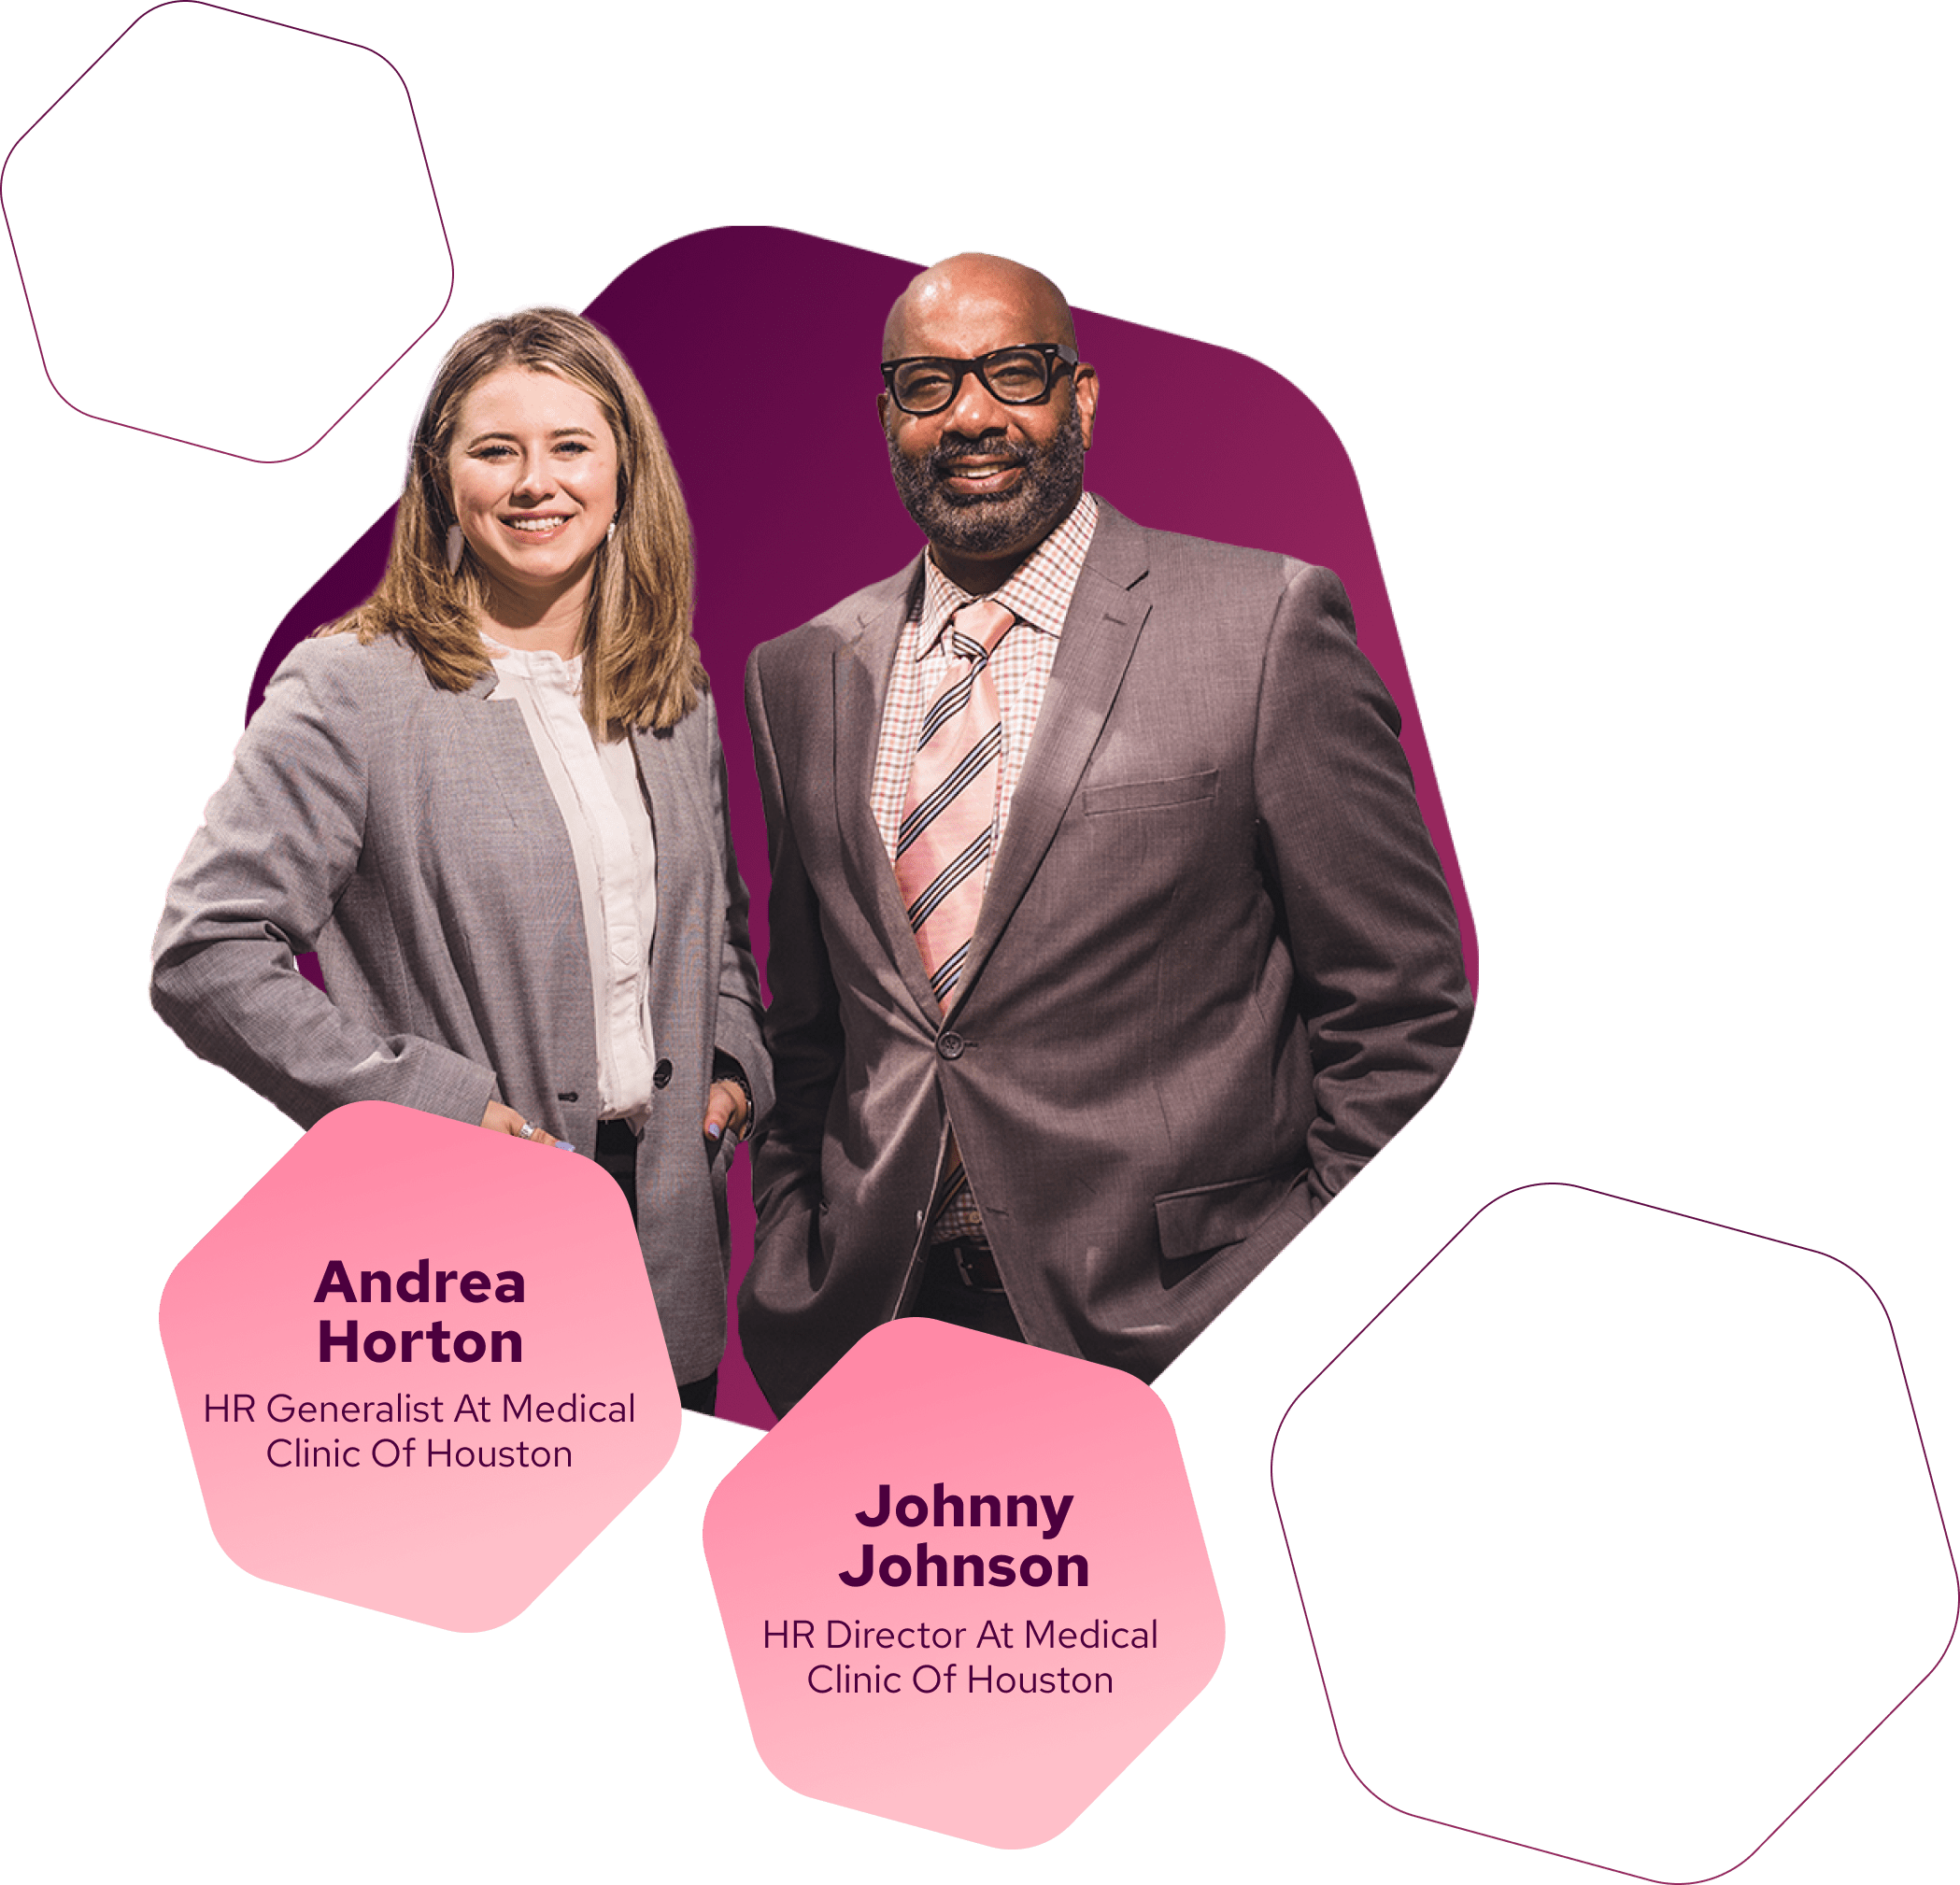 Andrea Horton - HR Generalist At Medical Clinic Of Houst0n & Johnny Johnson - HR Director At Medical Clinic Of Houston